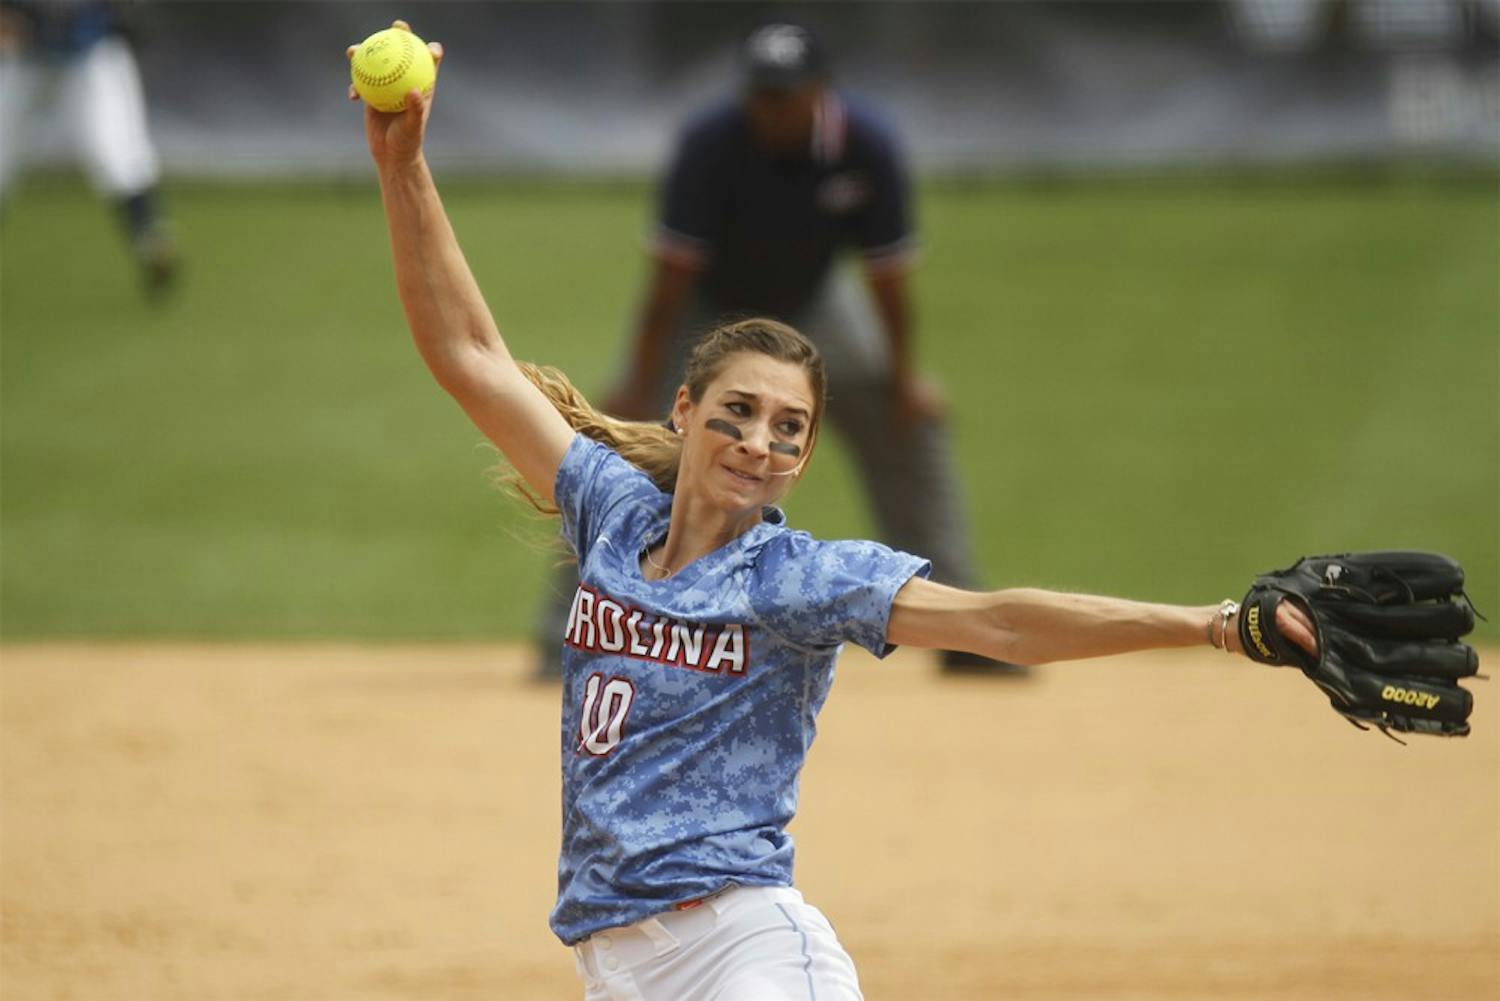 UNC pitcher, Lori Spingola, winds up a pitch against a Maryland opponent.  The Tar Heels defeated the Terps 11-5 in the first game of their double-header Saturday.